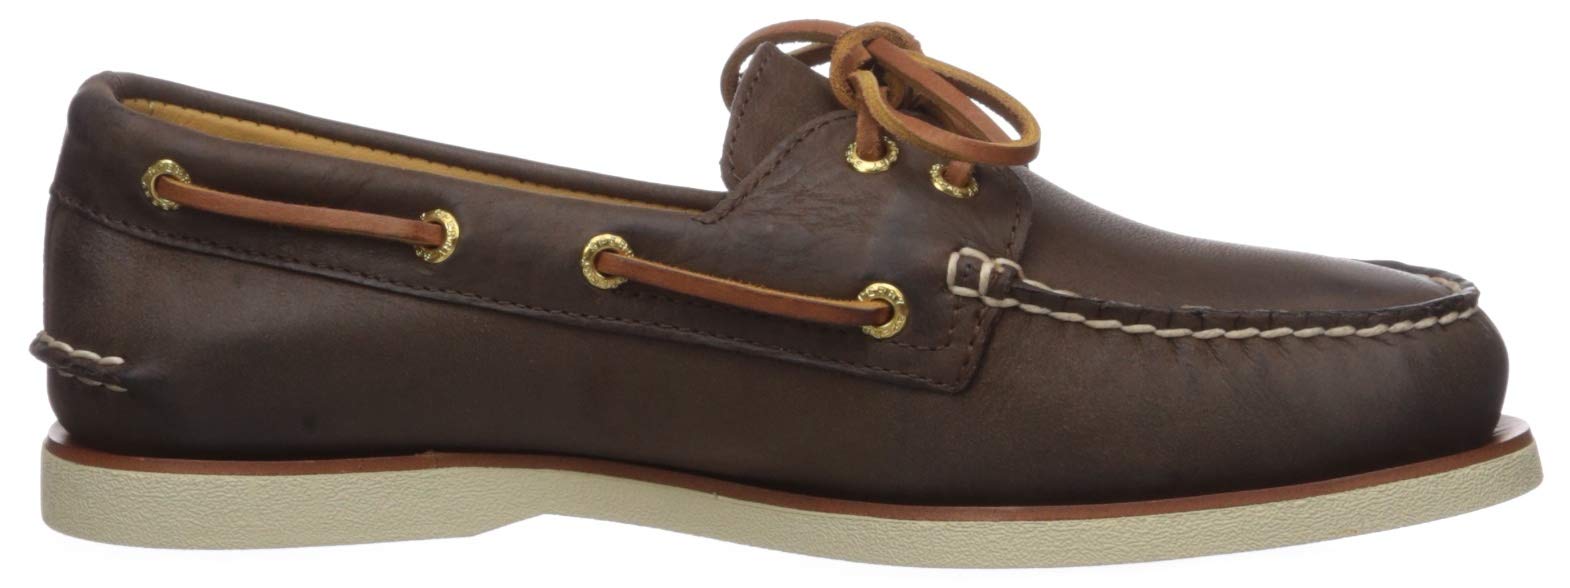 Sperry Men's Gold Cup Authentic Original 2-Eye Boat Shoe